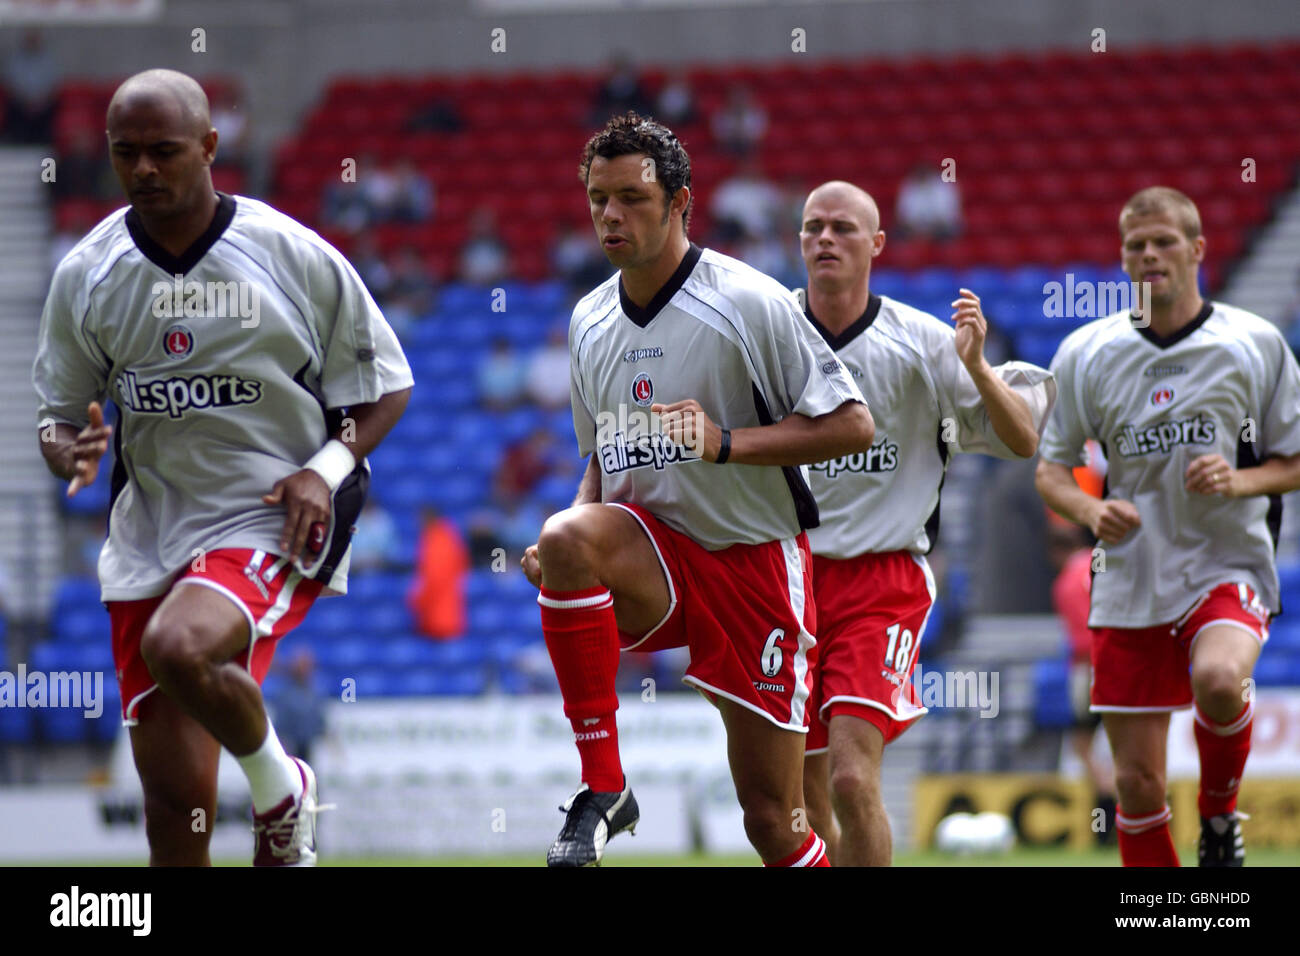 L-R: Charlton Athletic's Shaun Bartlett, Mark Fish, Paul Konchesky and Hermann Hreidarsson warm up prior to the game Stock Photo